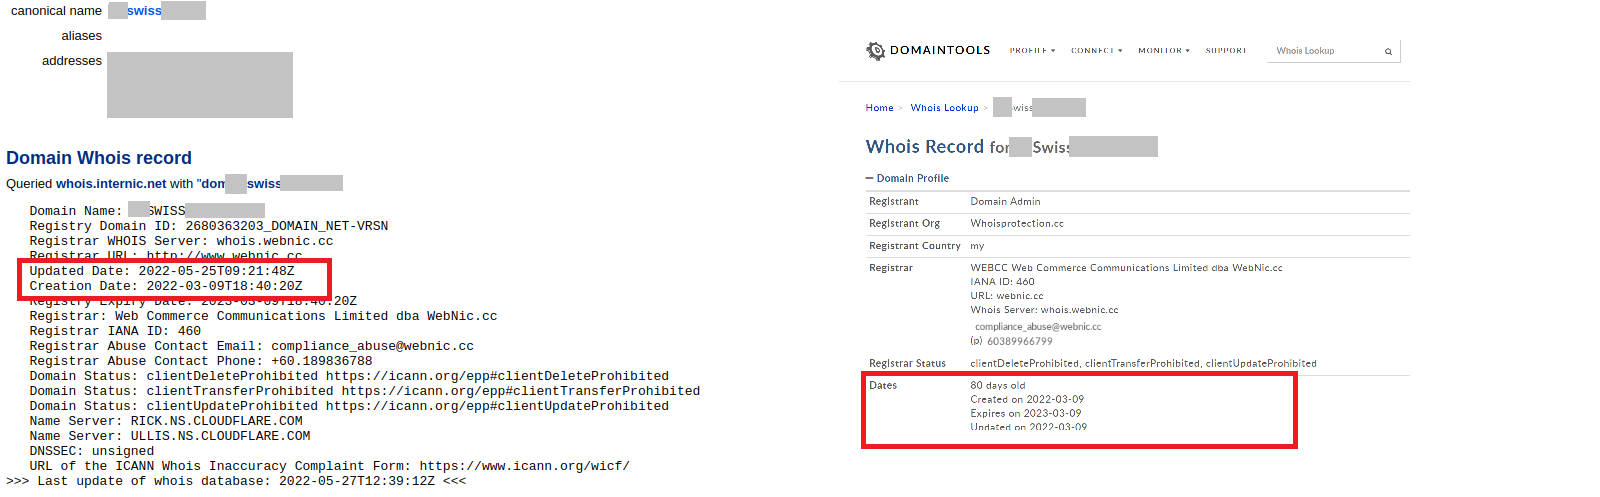 In contrast, the domain for this investment website was created only 80 days ago. On the left, the information was retrieved via the Whois service provider Centralops (https://centralops.net/co/) and on the right, via the service provider Domaintools https://whois.domaintools.com/.